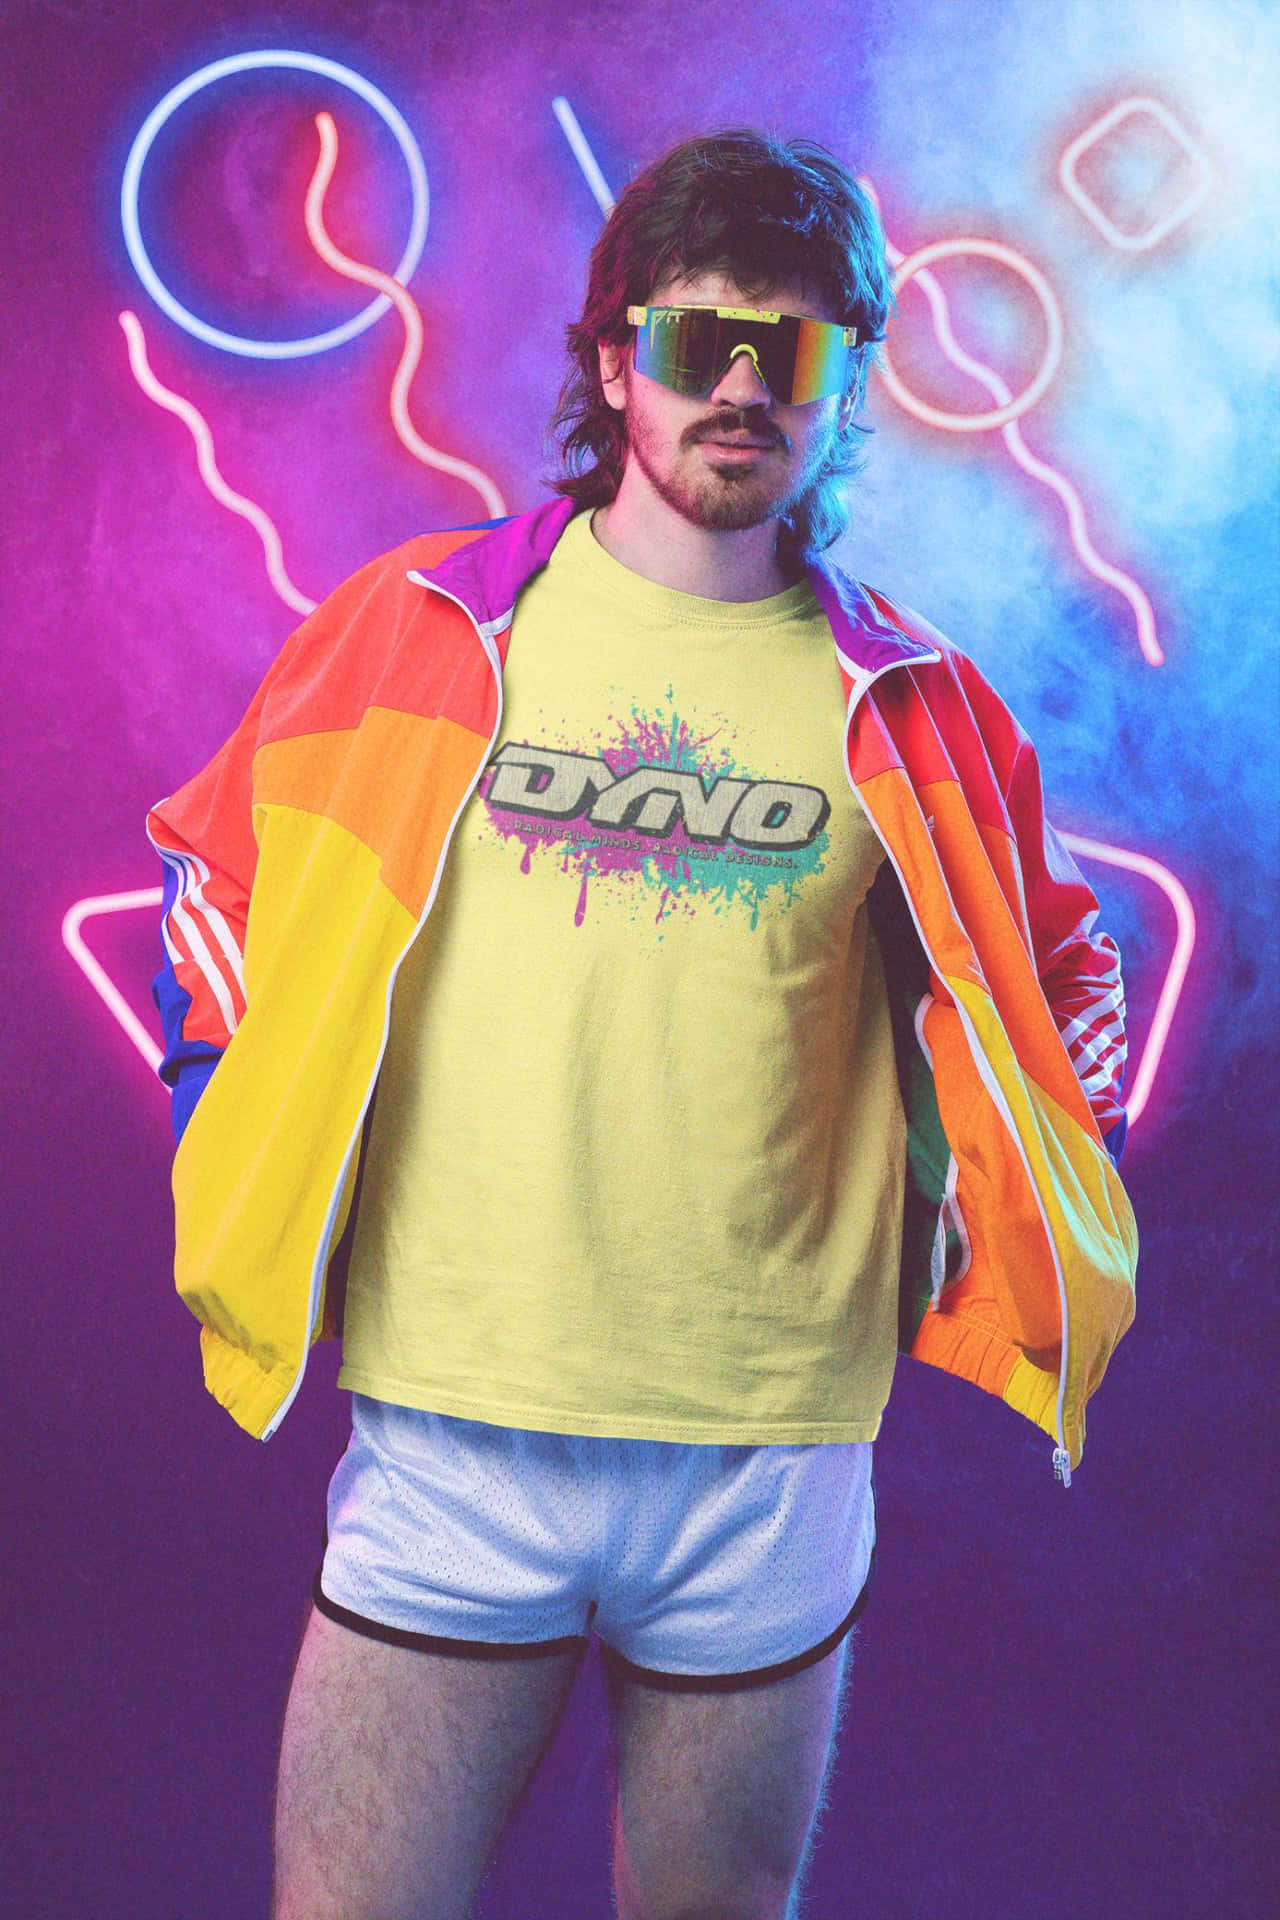 A Man In A Neon Jacket And Shorts